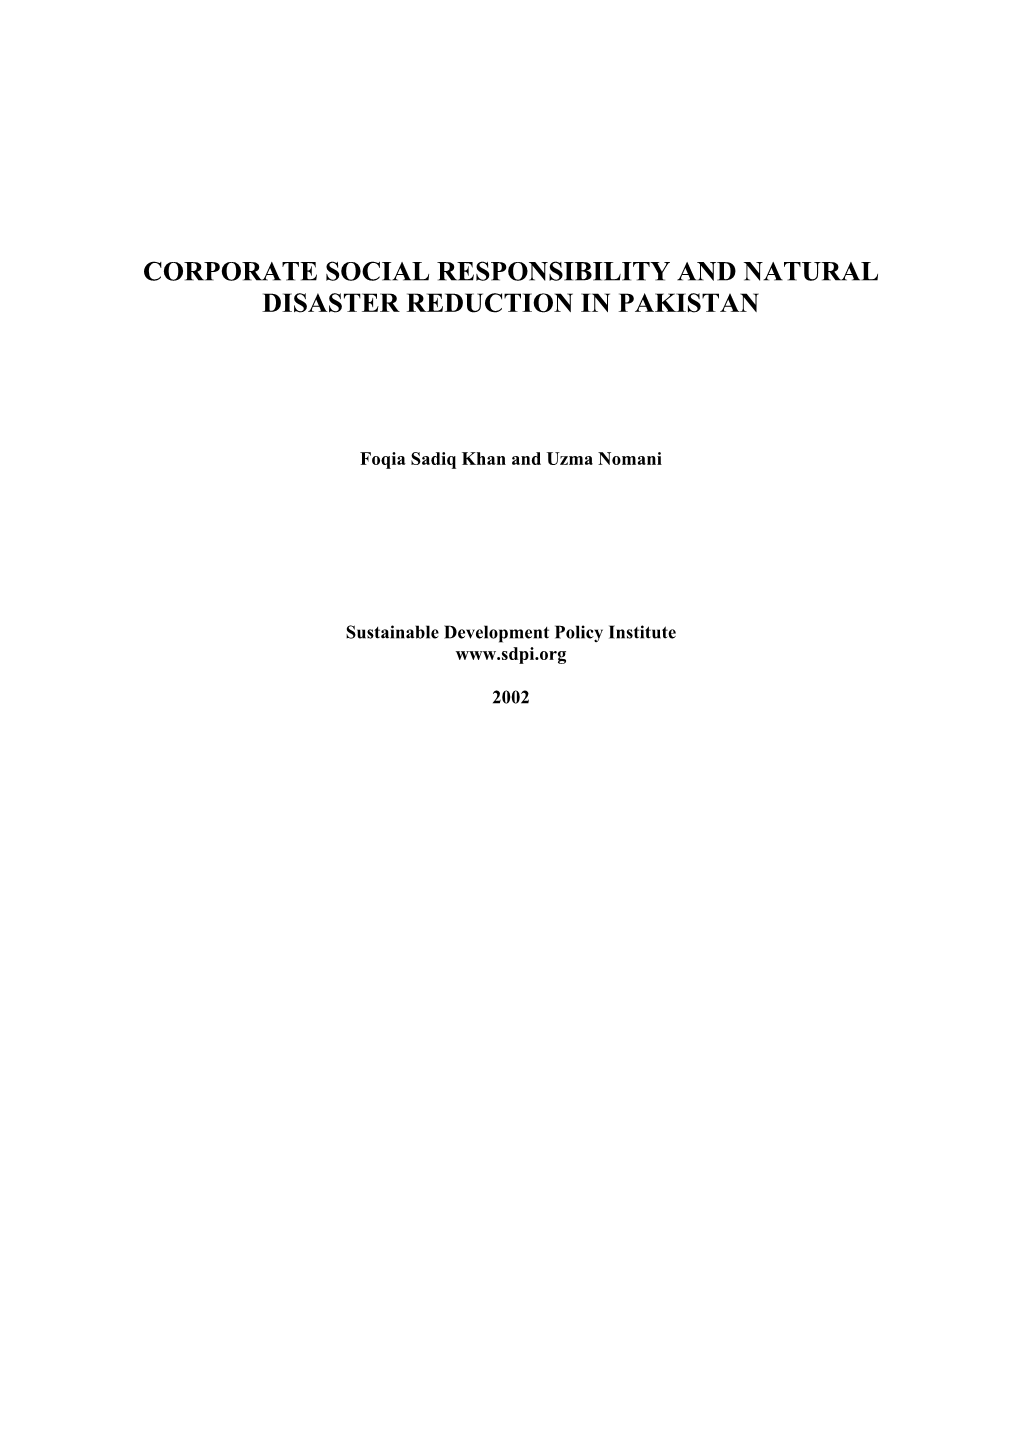 Corporate Social Responsibility and Natural Disaster Reduction in Pakistan